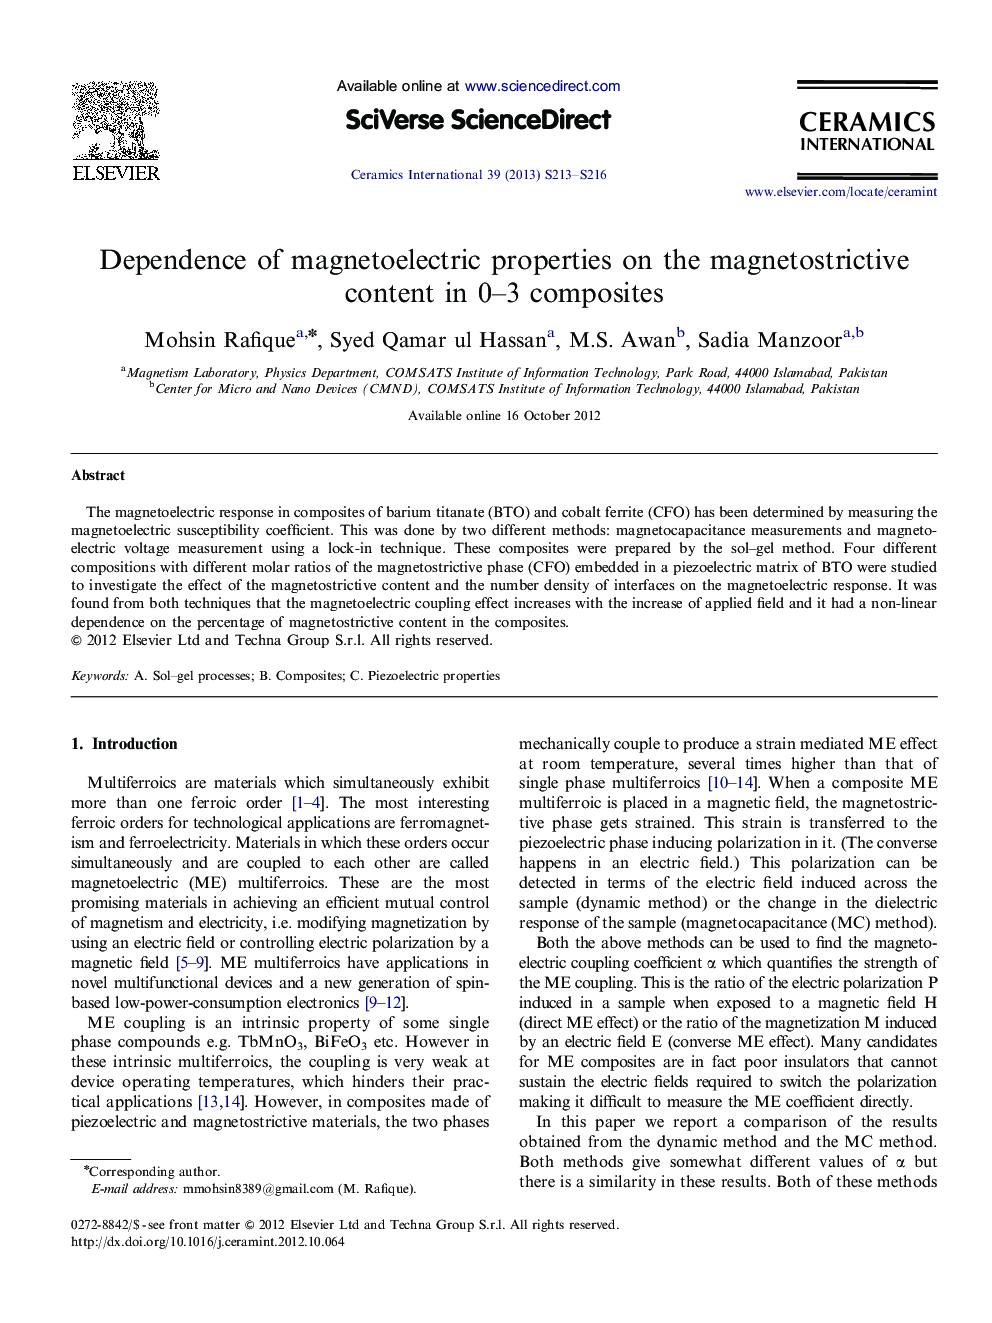 Dependence of magnetoelectric properties on the magnetostrictive content in 0–3 composites